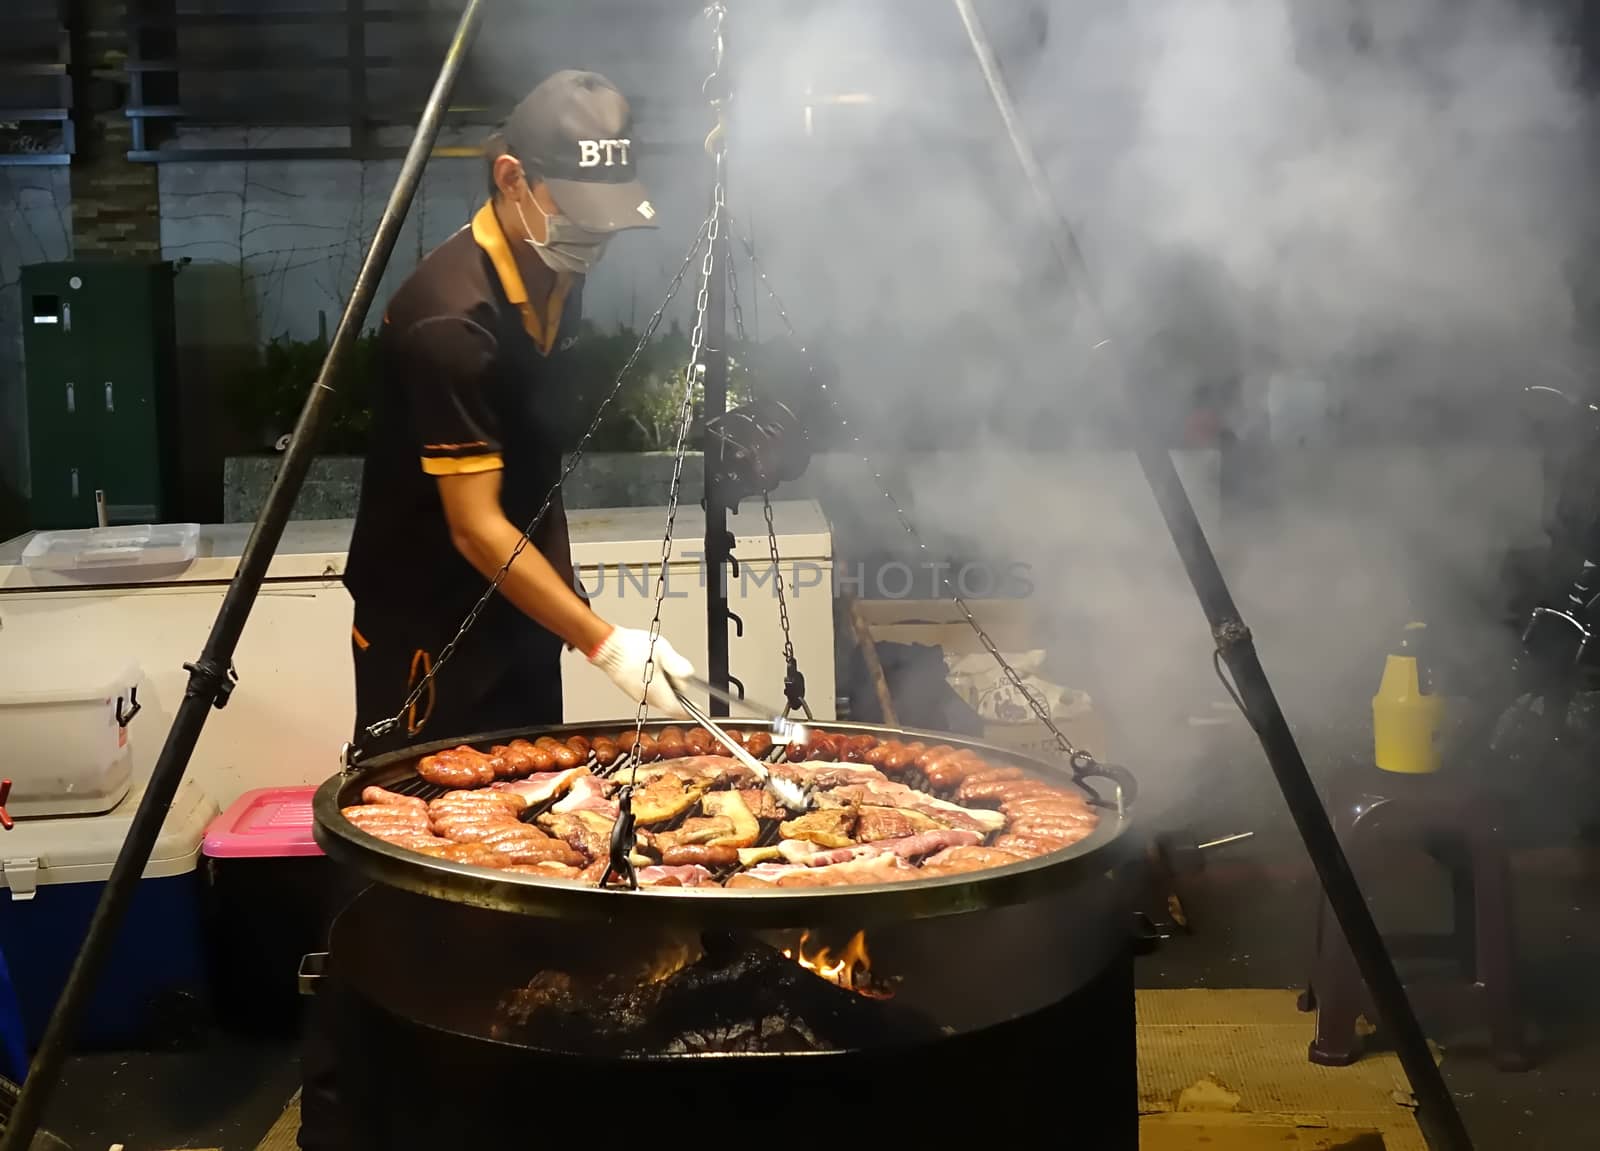 KAOHSIUNG, TAIWAN -- MARCH 2, 2018: An outdoor vendor at a night market grills fresh pork sausages and meat.